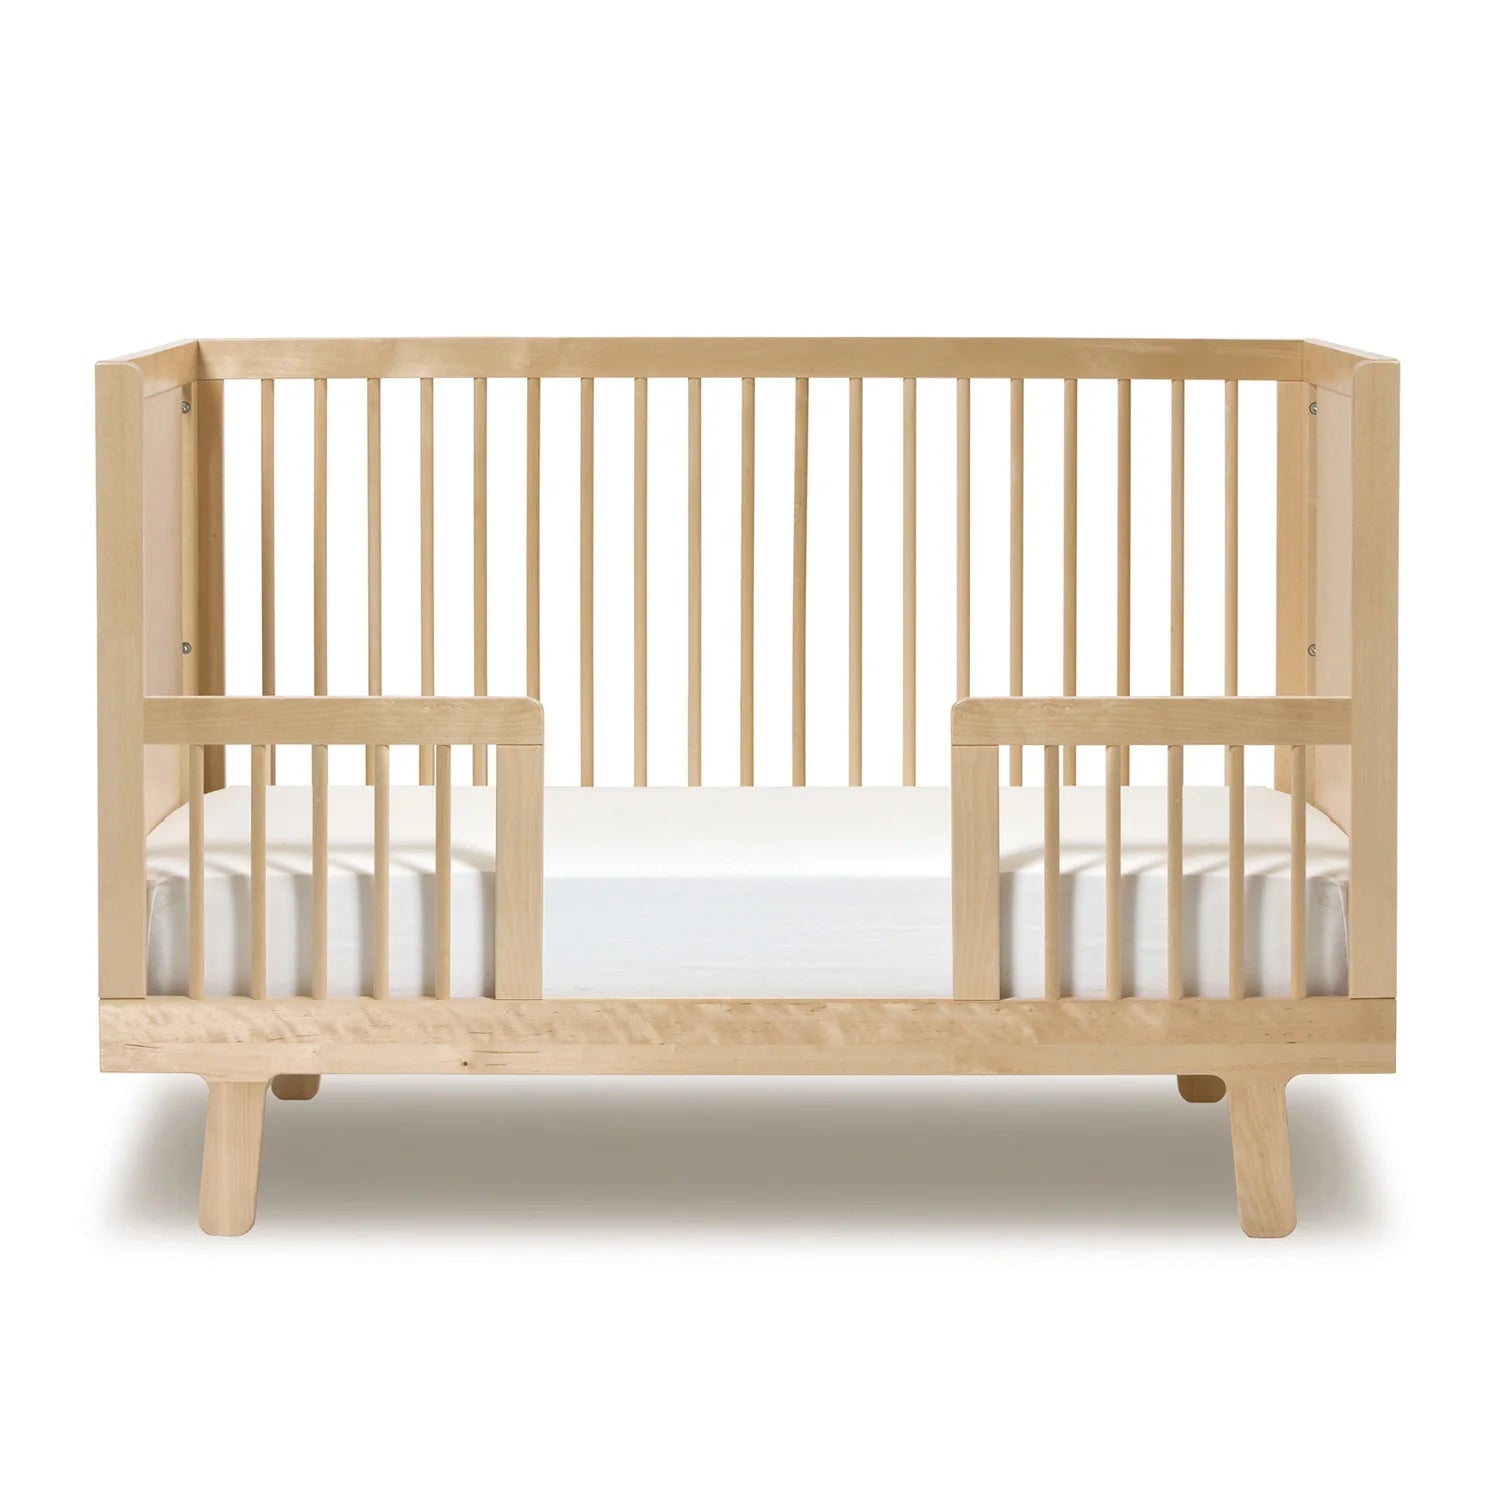 Sparrow Toddler Bed Conversion Kit